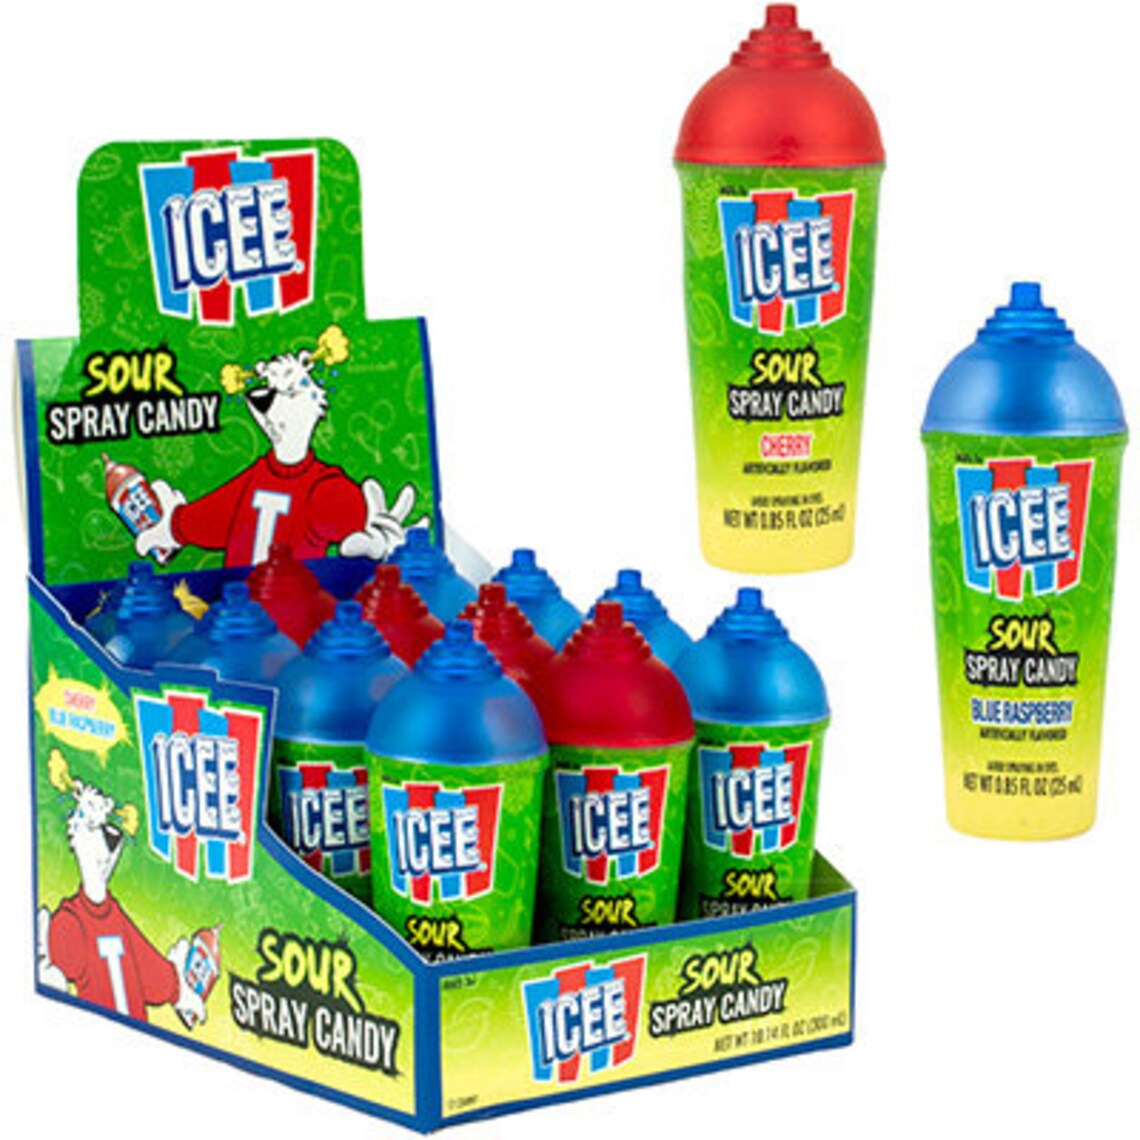 ICEE Sour Spray Candy (12ct)